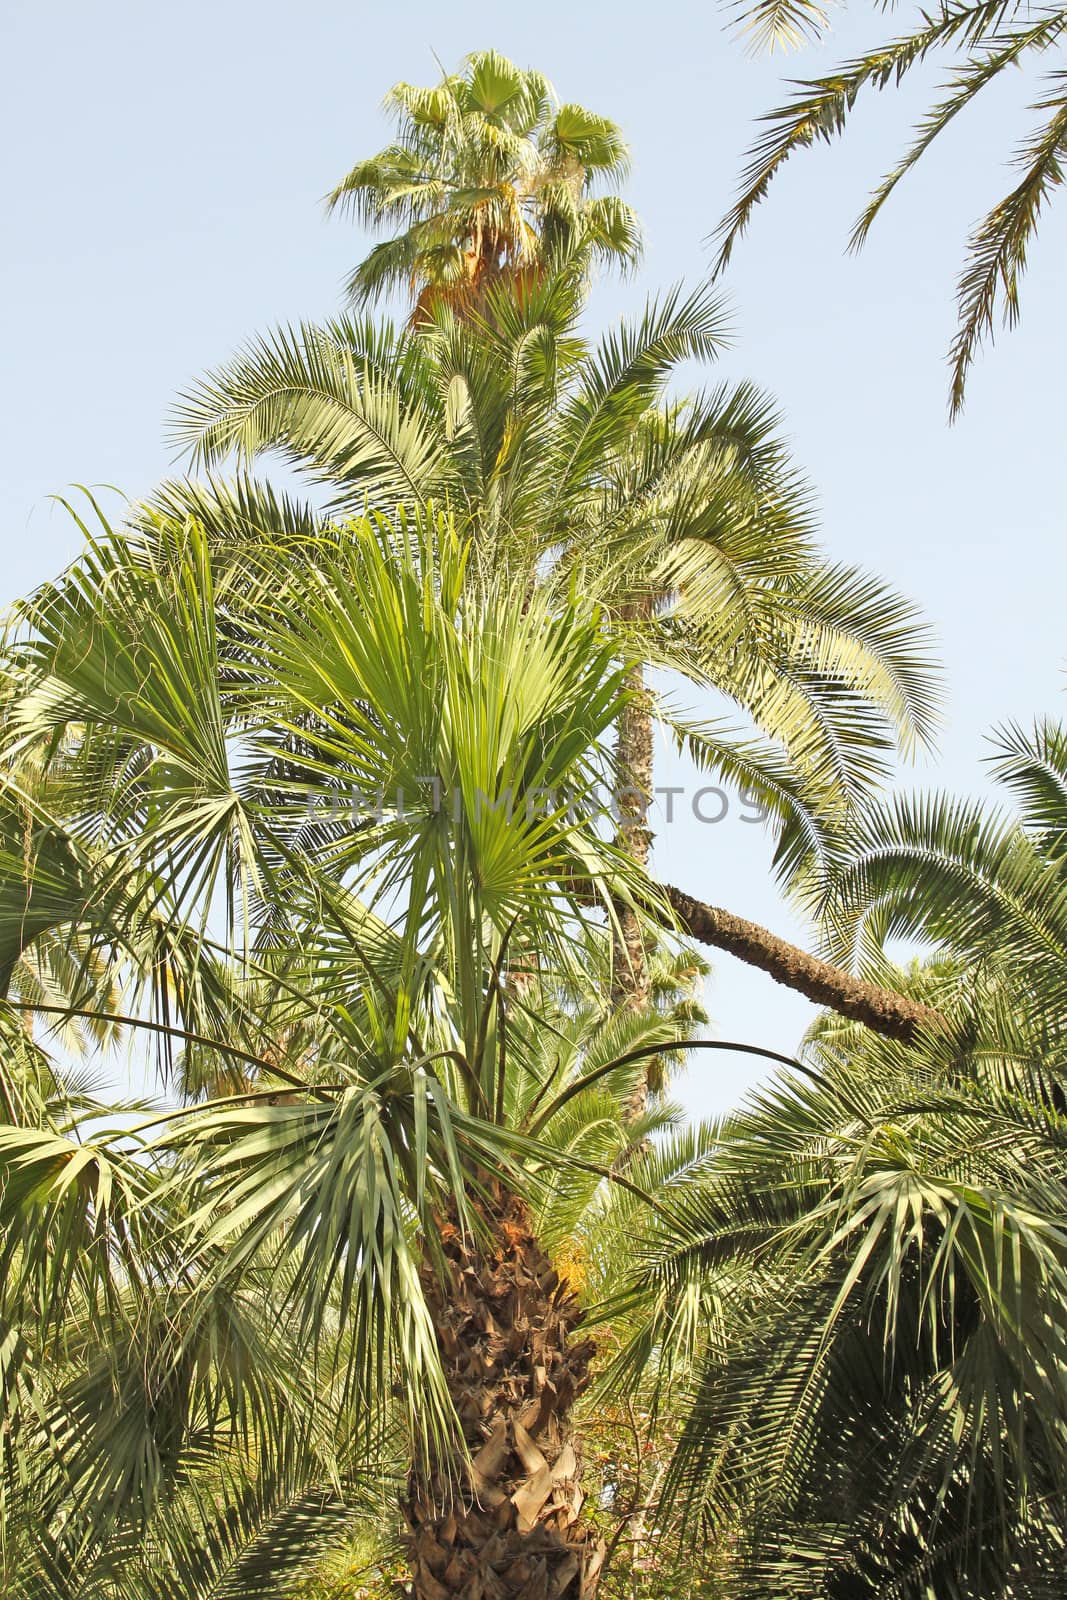 Tropical forest: beautiful palms and other trees under sunlight
